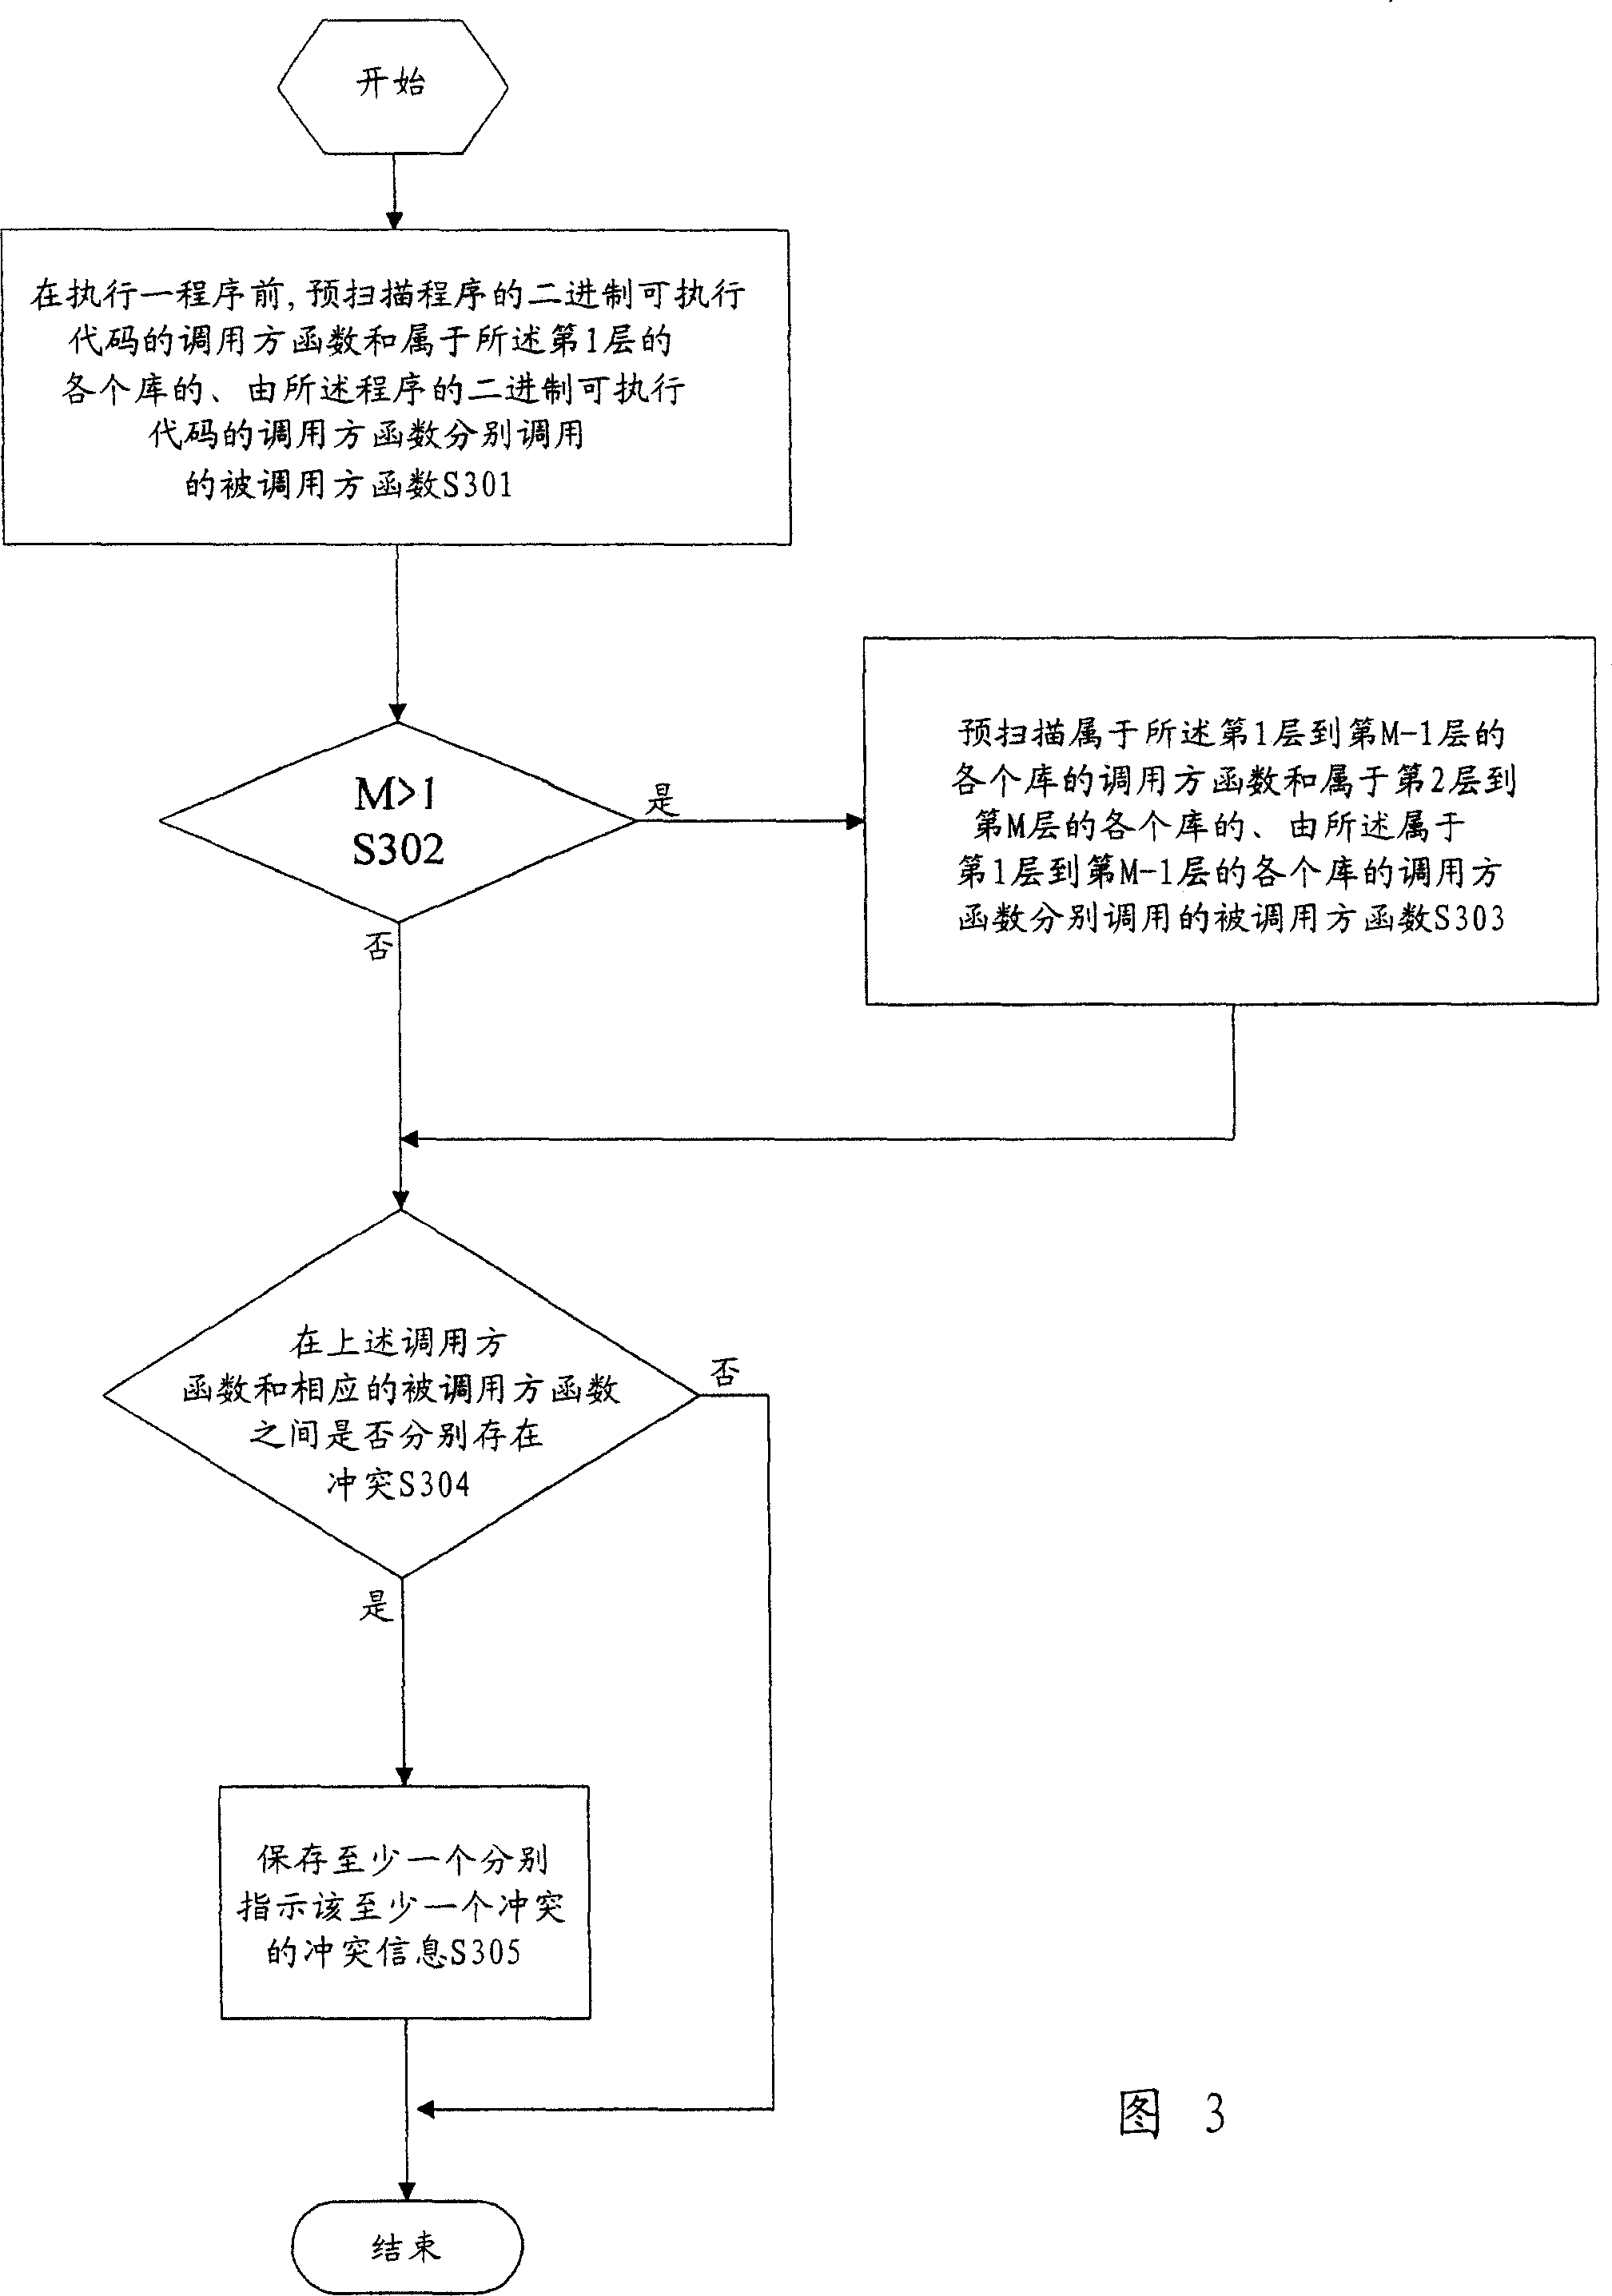 Method and system for avoiding software conflict